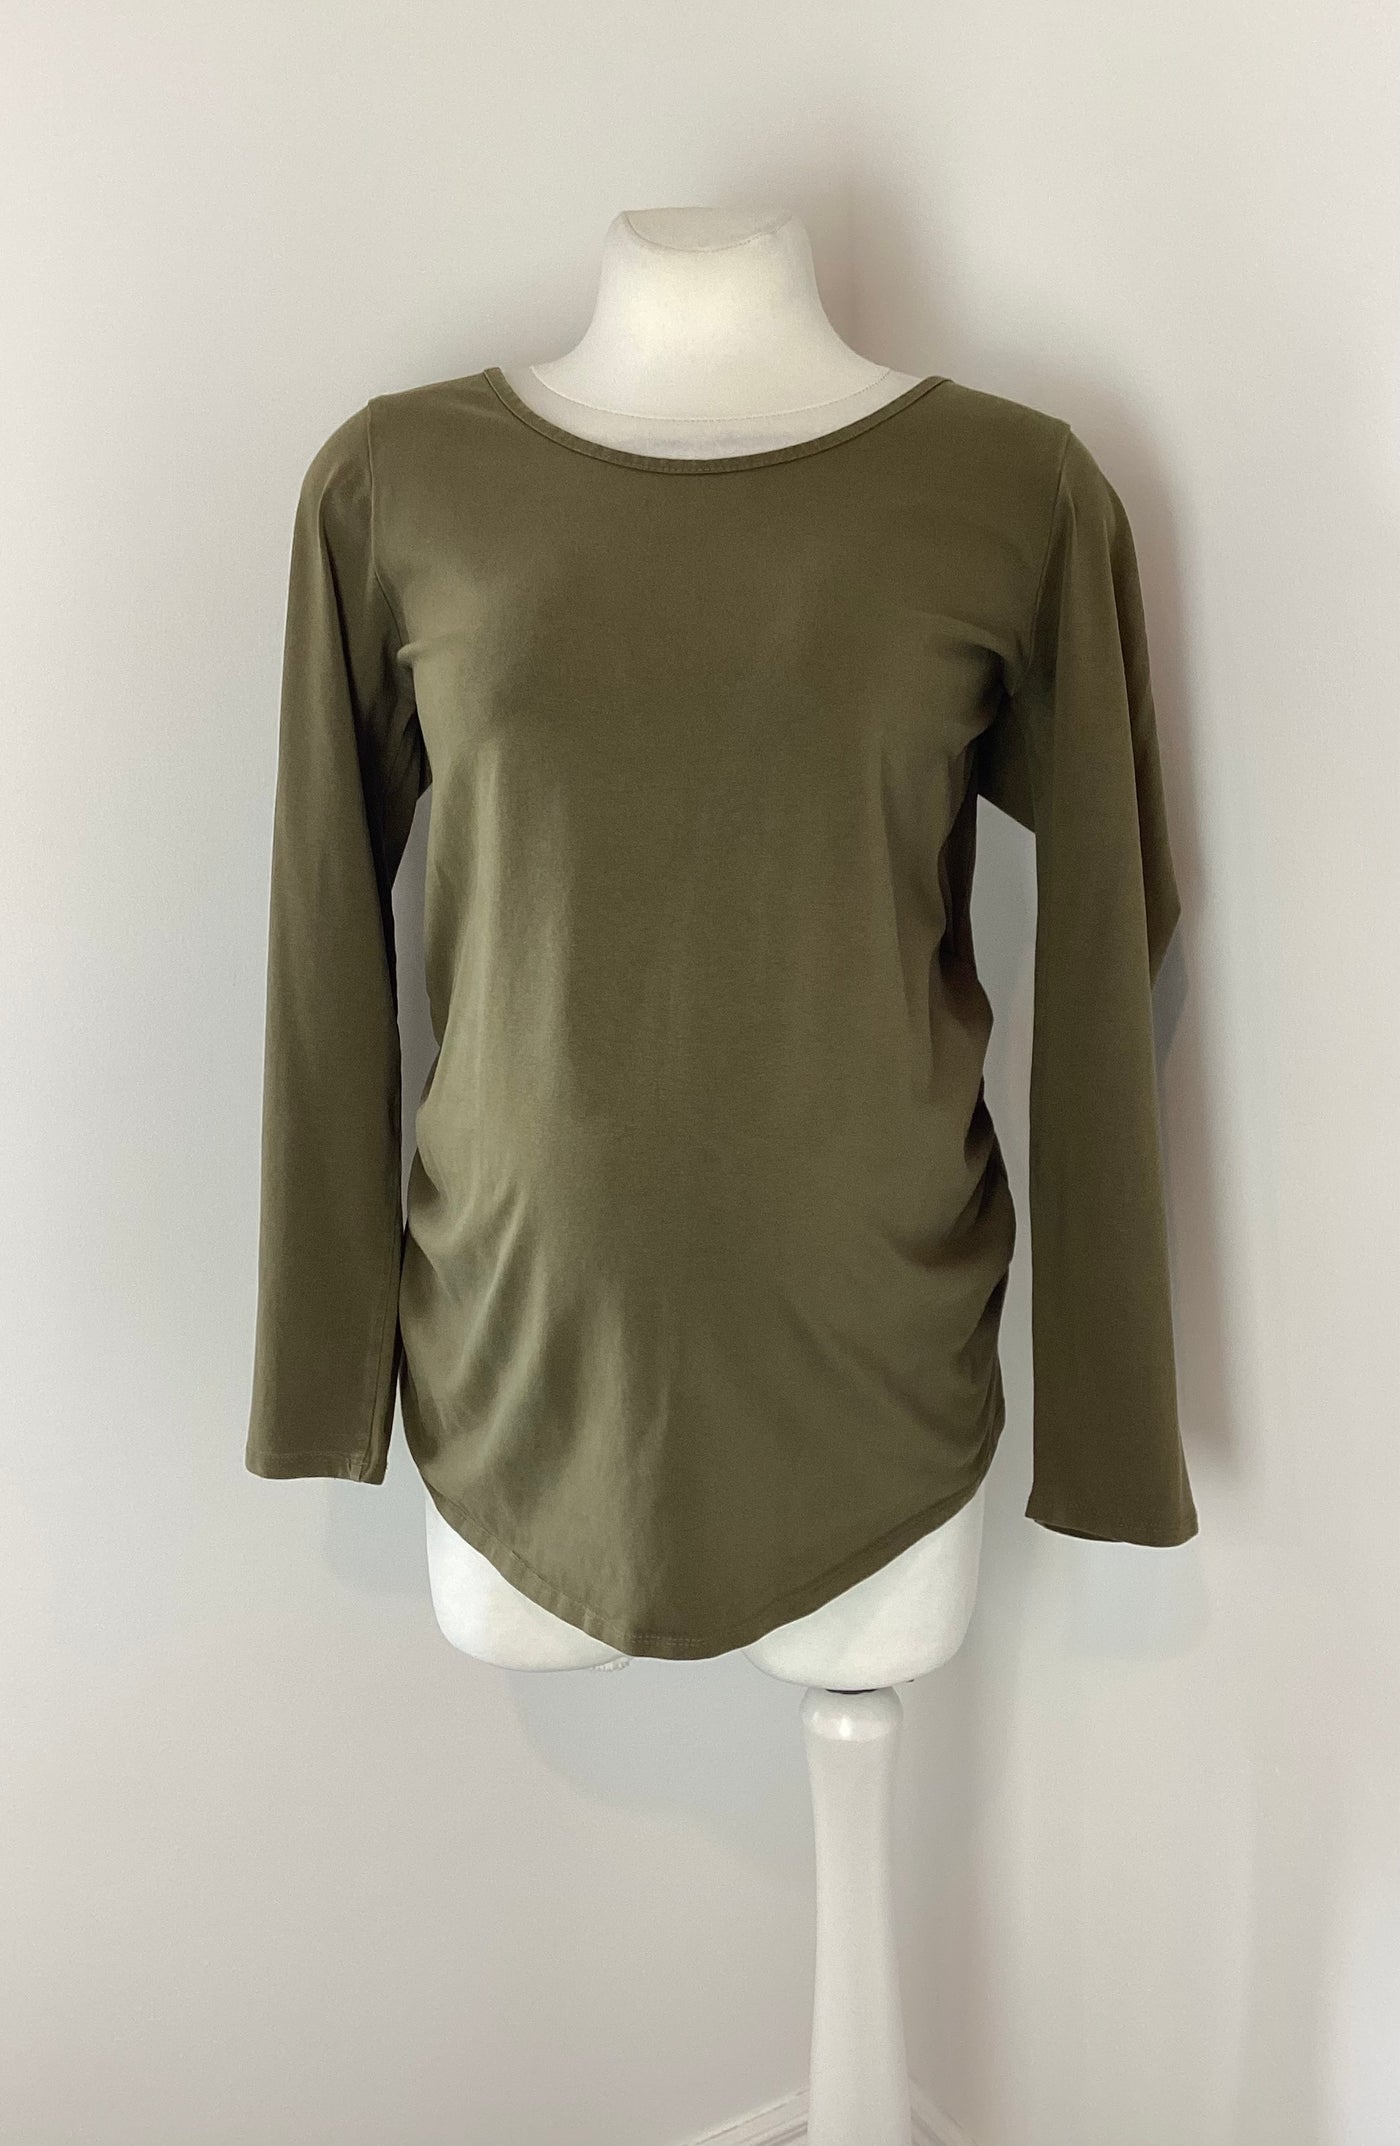 George Maternity army green long sleeved top - Size 18 (more like 16/18)